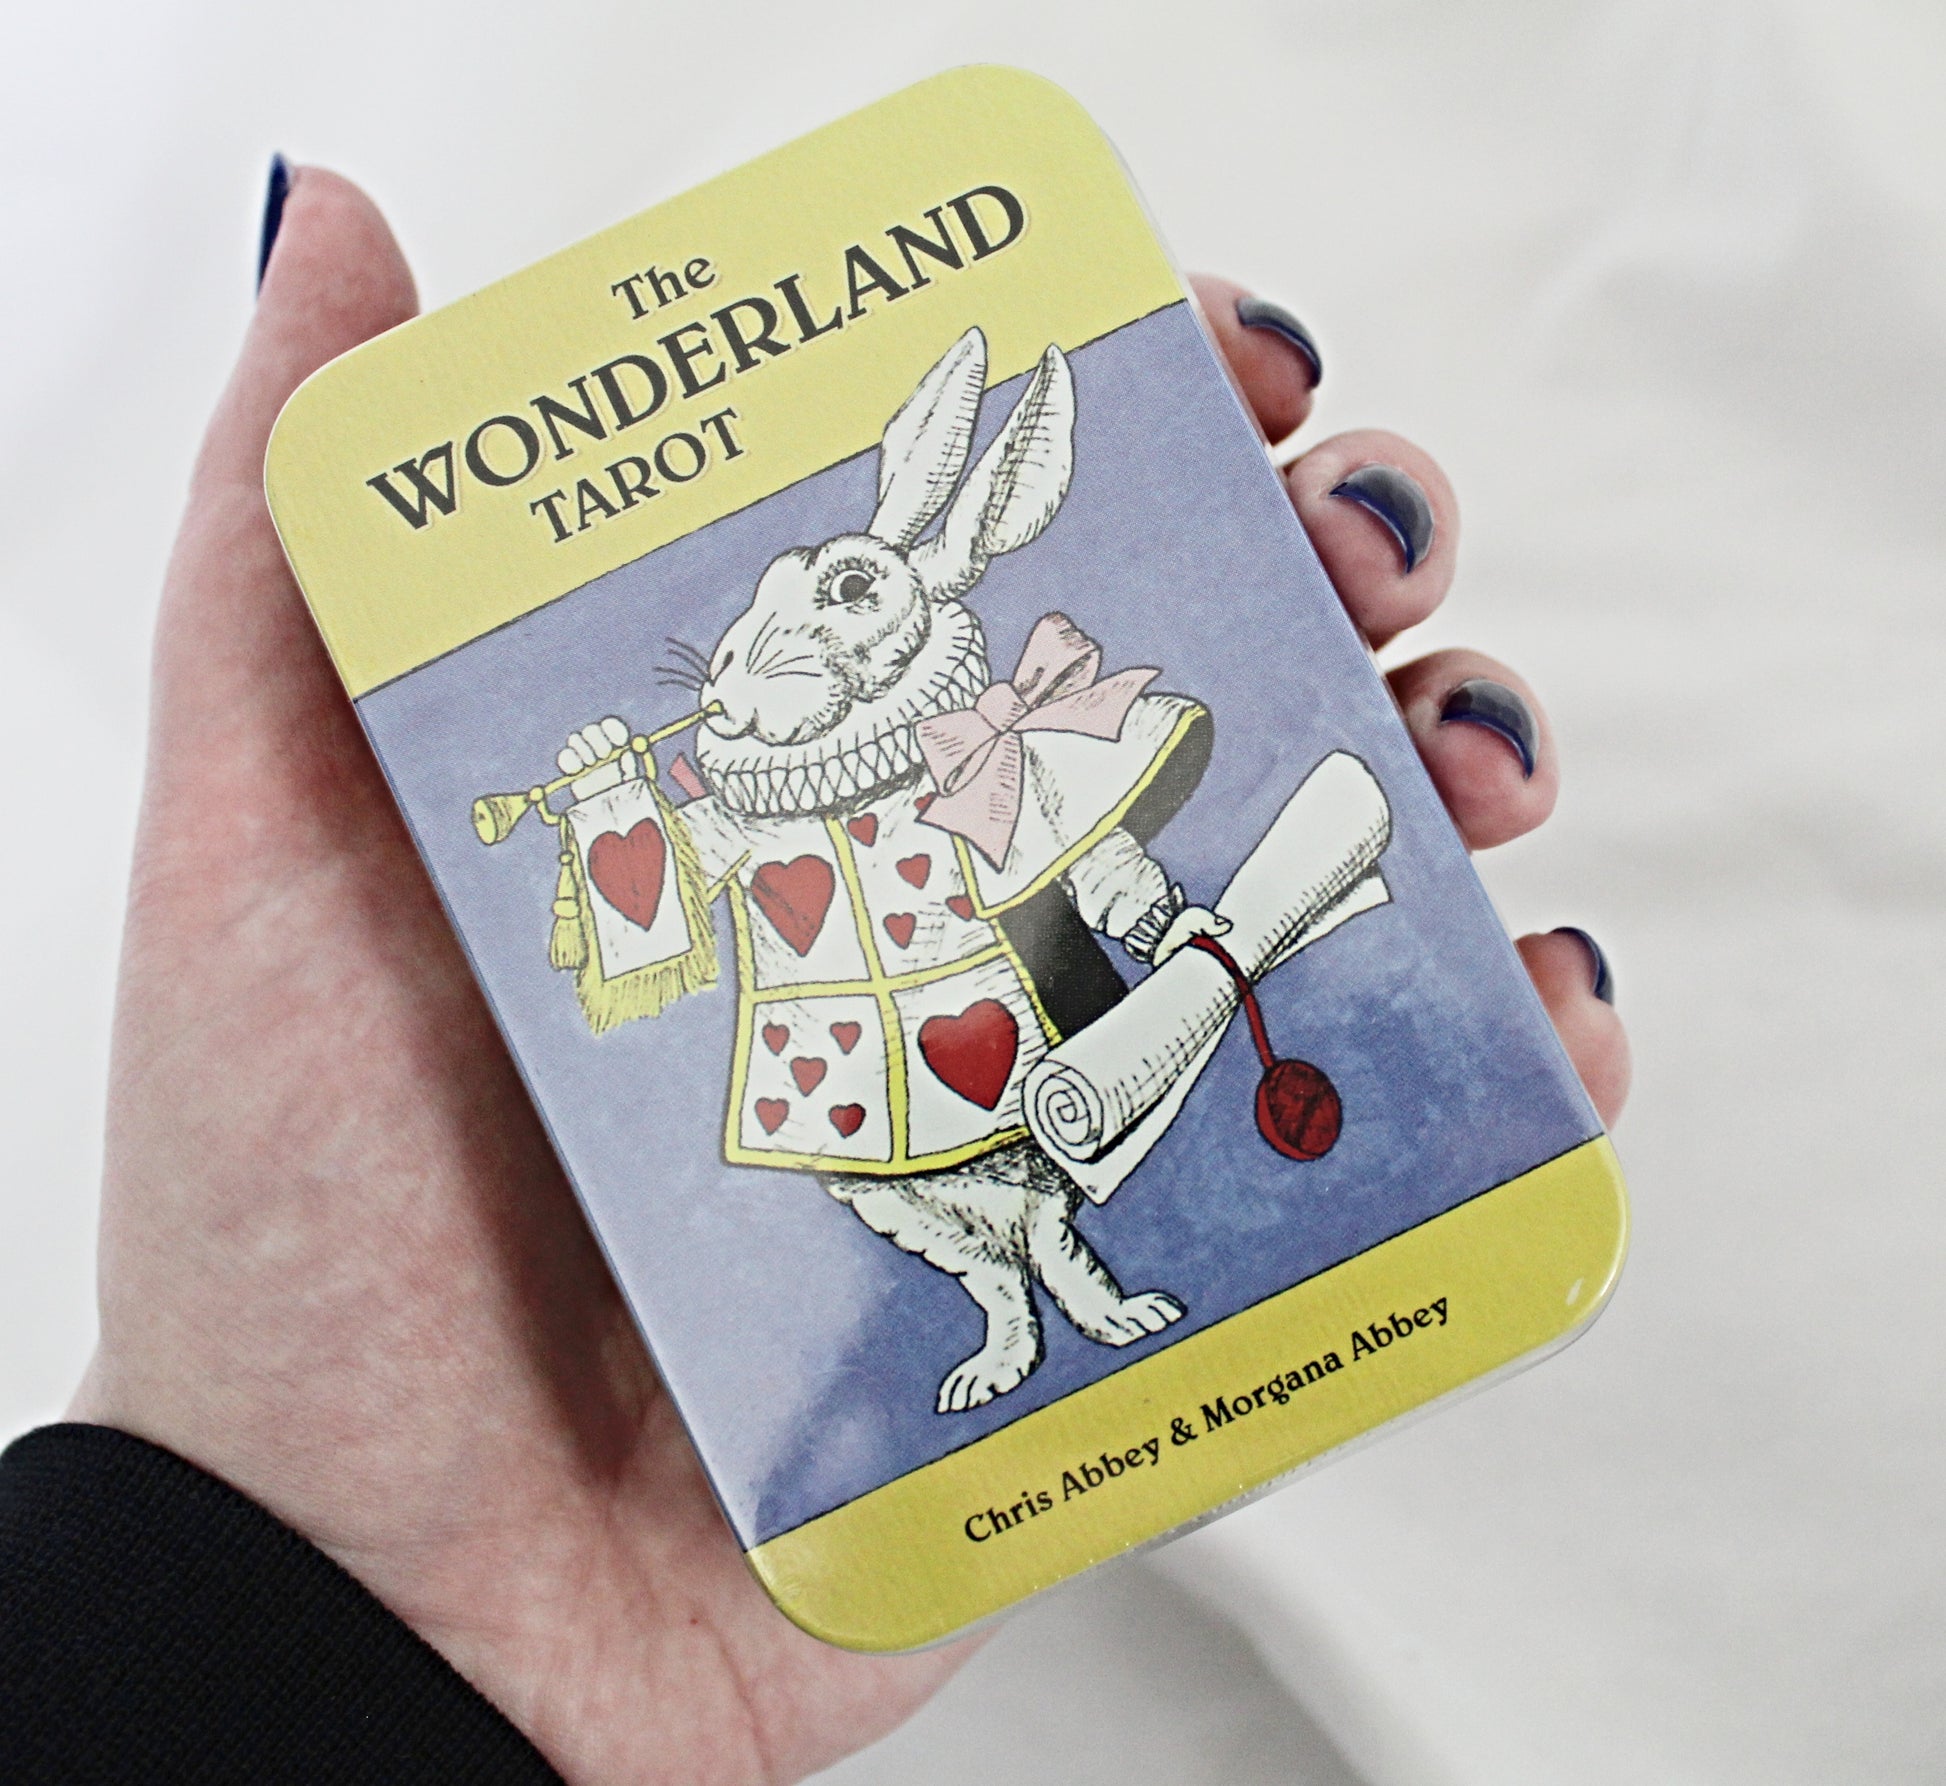 Unsure what these Alice in Wonderland tarot deck cards would be, deck by  Christopher and Morgana Abbey, anyone have this deck? : r/tarot